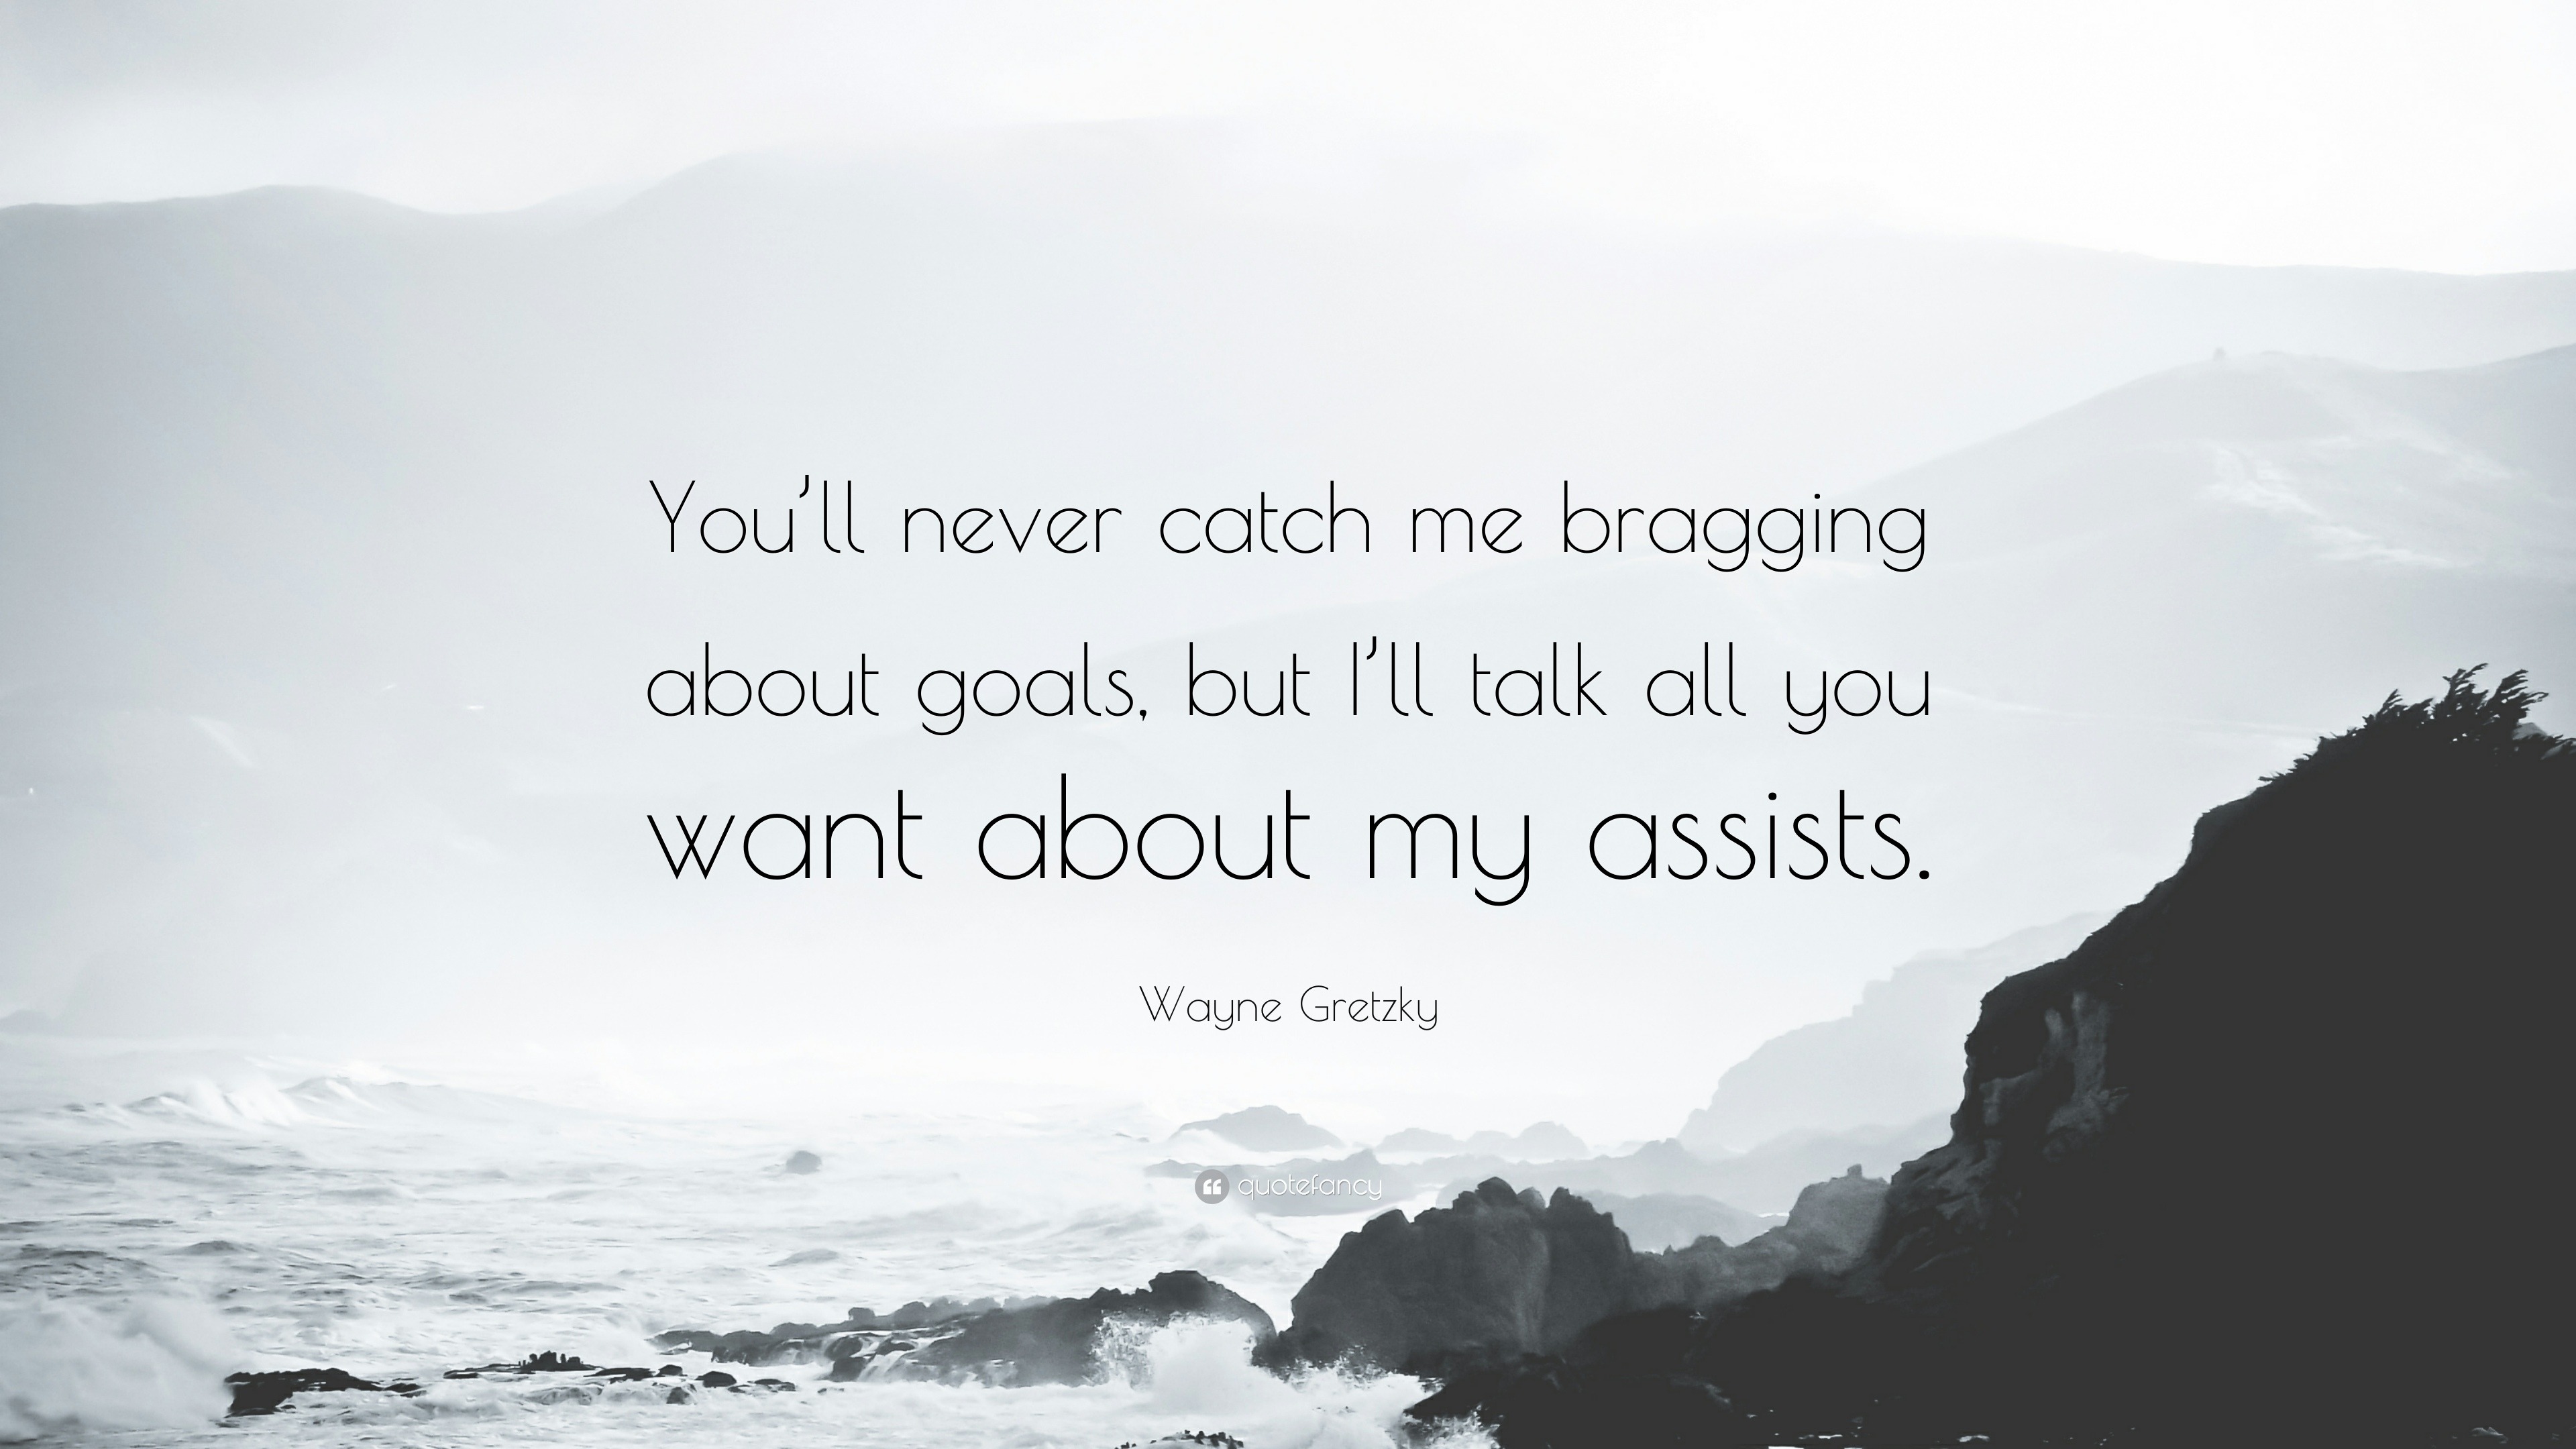 Wayne Gretzky Quote You Ll Never Catch Me Bragging About Goals But I Ll Talk All